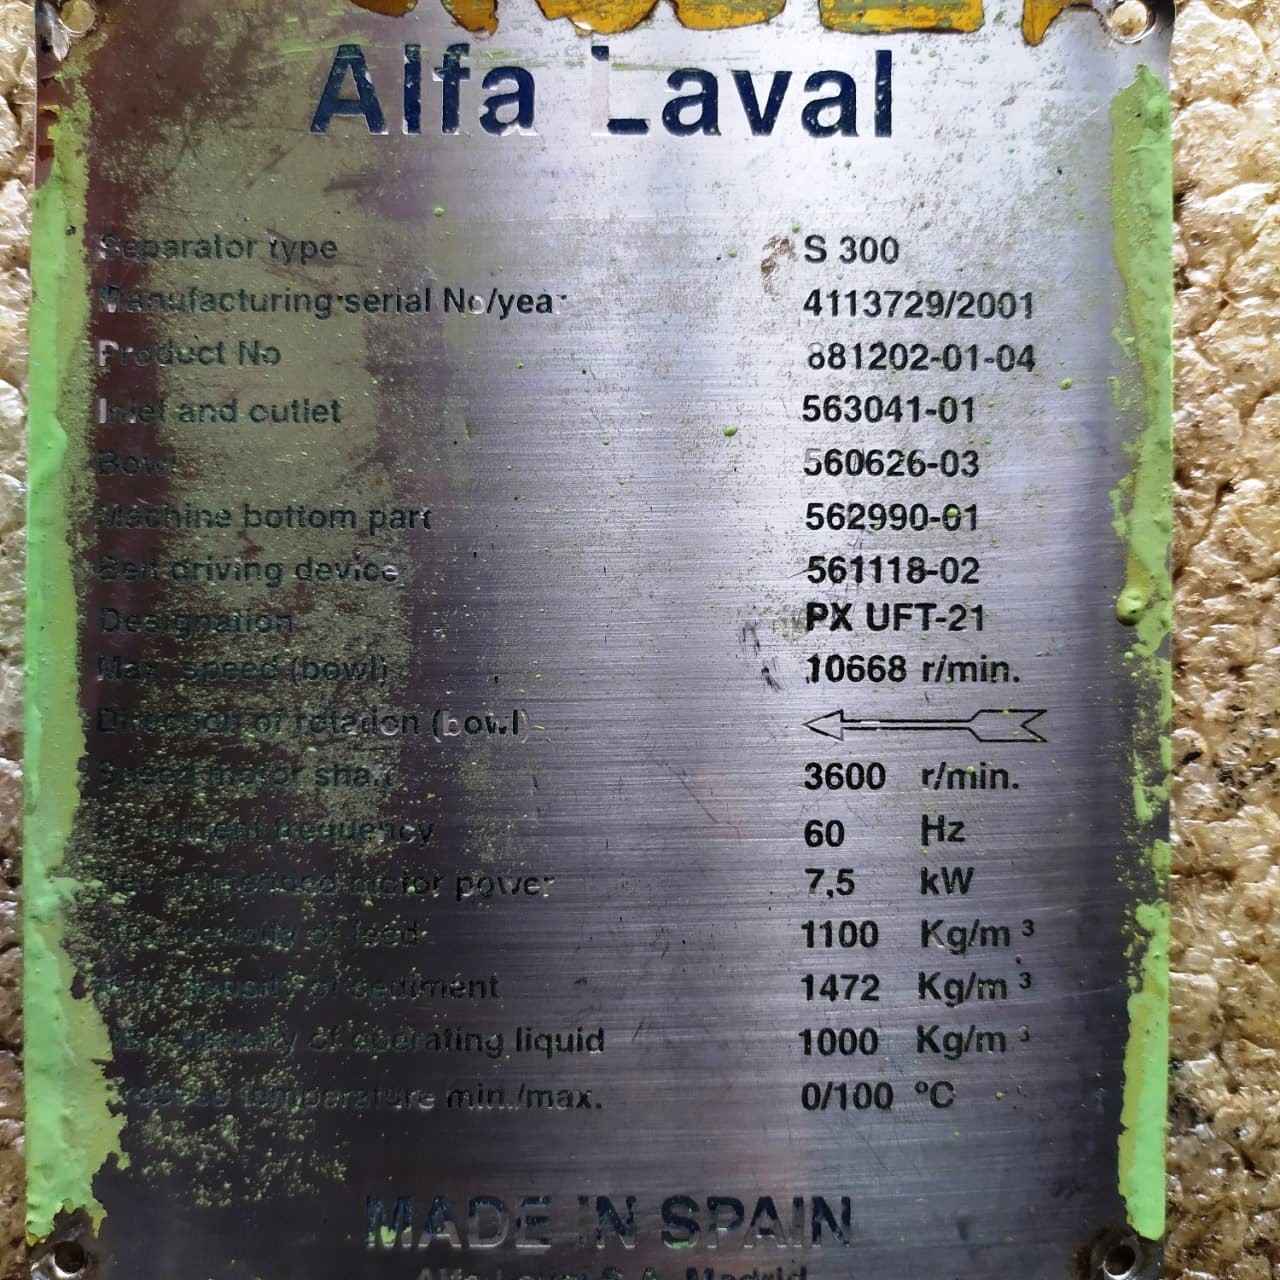 Alfa-Laval S-300 fuel/lube oil purifier, 316SS.